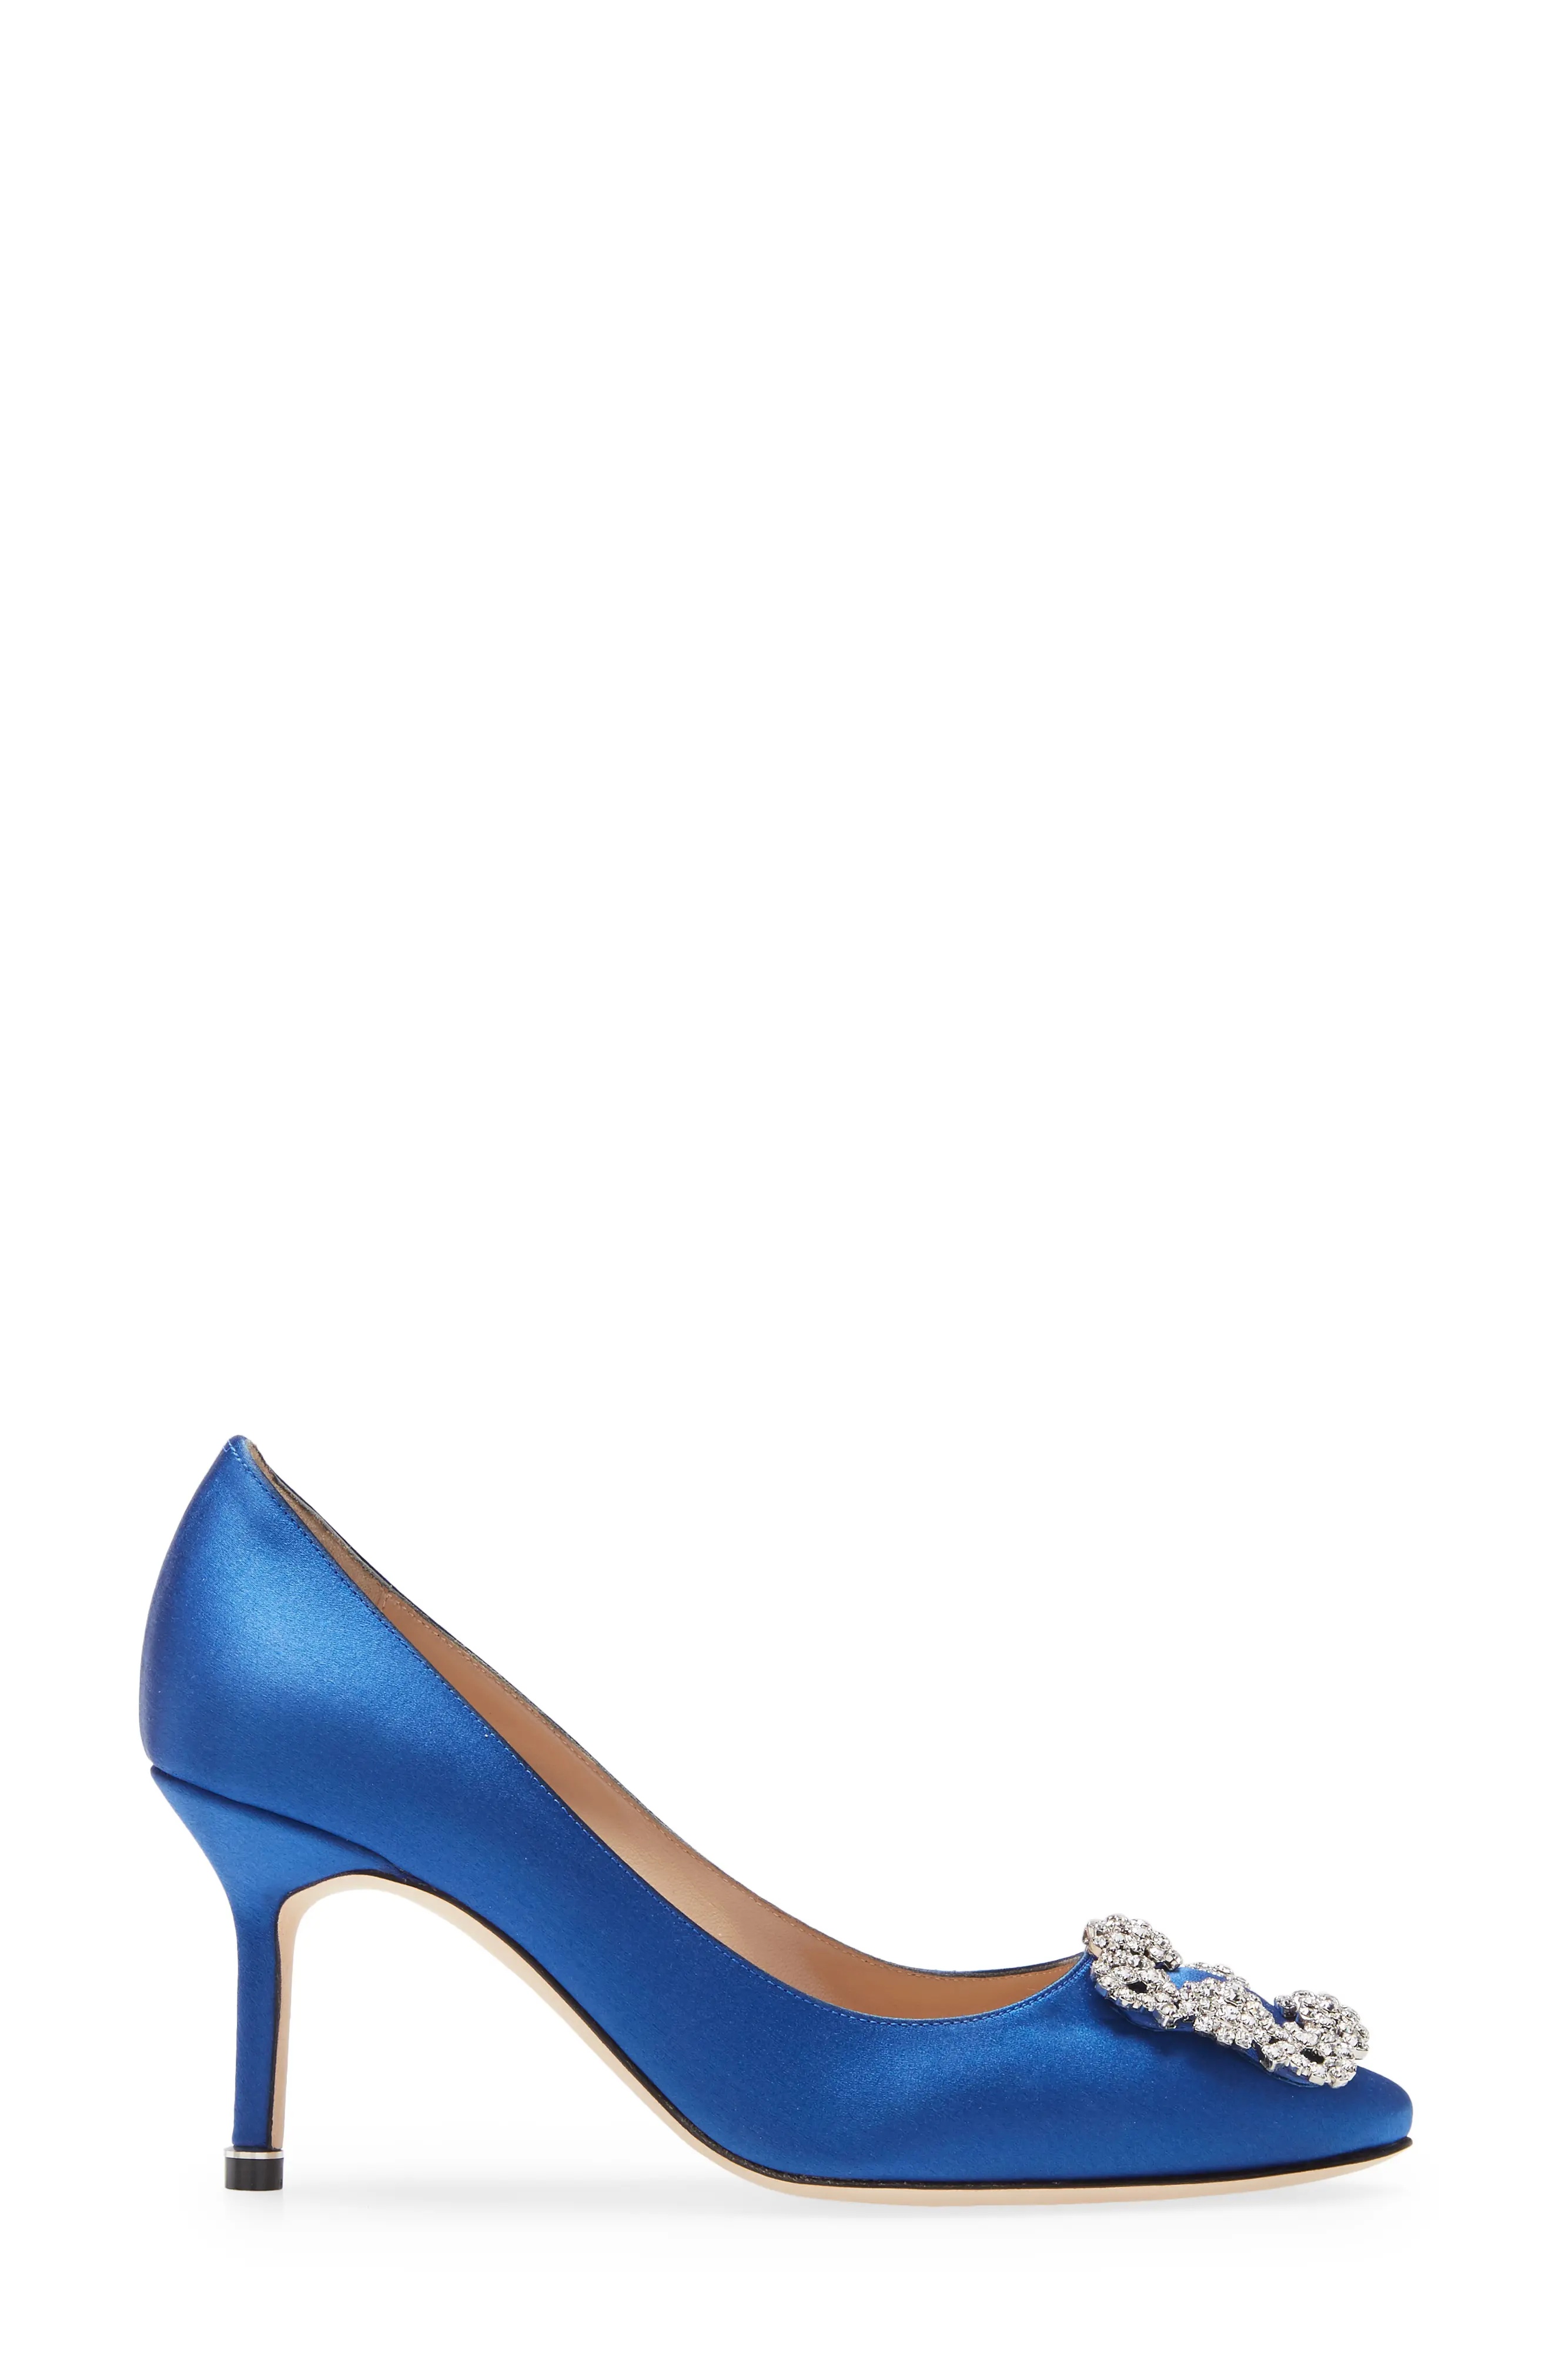 Hangisi Crystal Buckle Pump in Blue Satin Clear/Buckle - 3